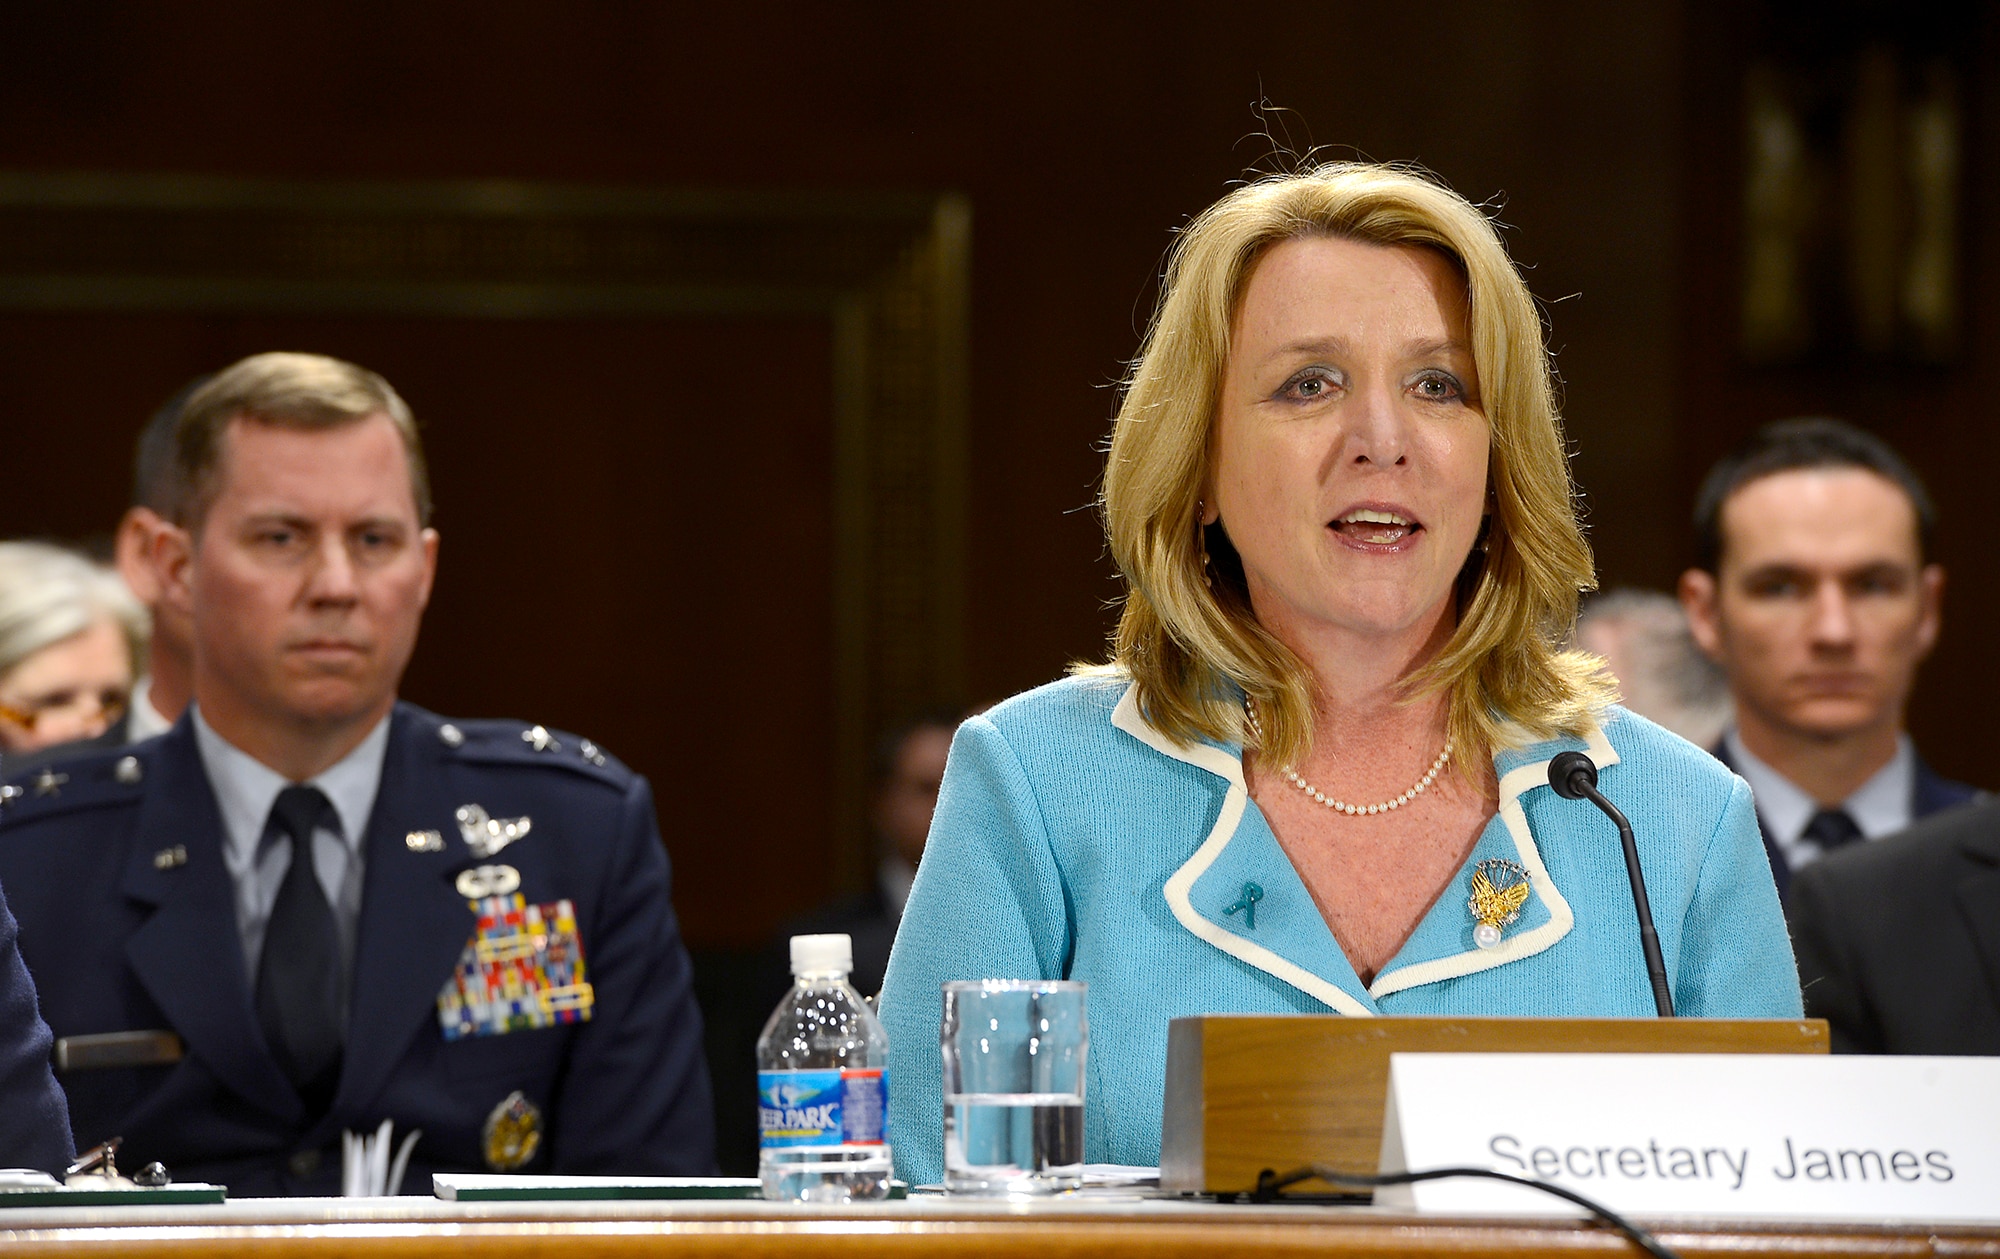 Secretary of the Air Force Deborah Lee James testifies on the Air Force posture for fiscal year 2015 before the Senate Appropriations Committee on Defense, April 2, 2014, in Washington, D.C.  Also testifying were Air Force Chief of Staff Gen. Mark A. Welsh III; Gen. James "JJ" Jackson, the Air Force Reserve chief; Gen. Frank J. Grass, the National Guard bureau chief; and Lt. Gen. Stanley E. Clarke III, the Air National Guard director.  (U.S. Air Force photo/Scott M. Ash)